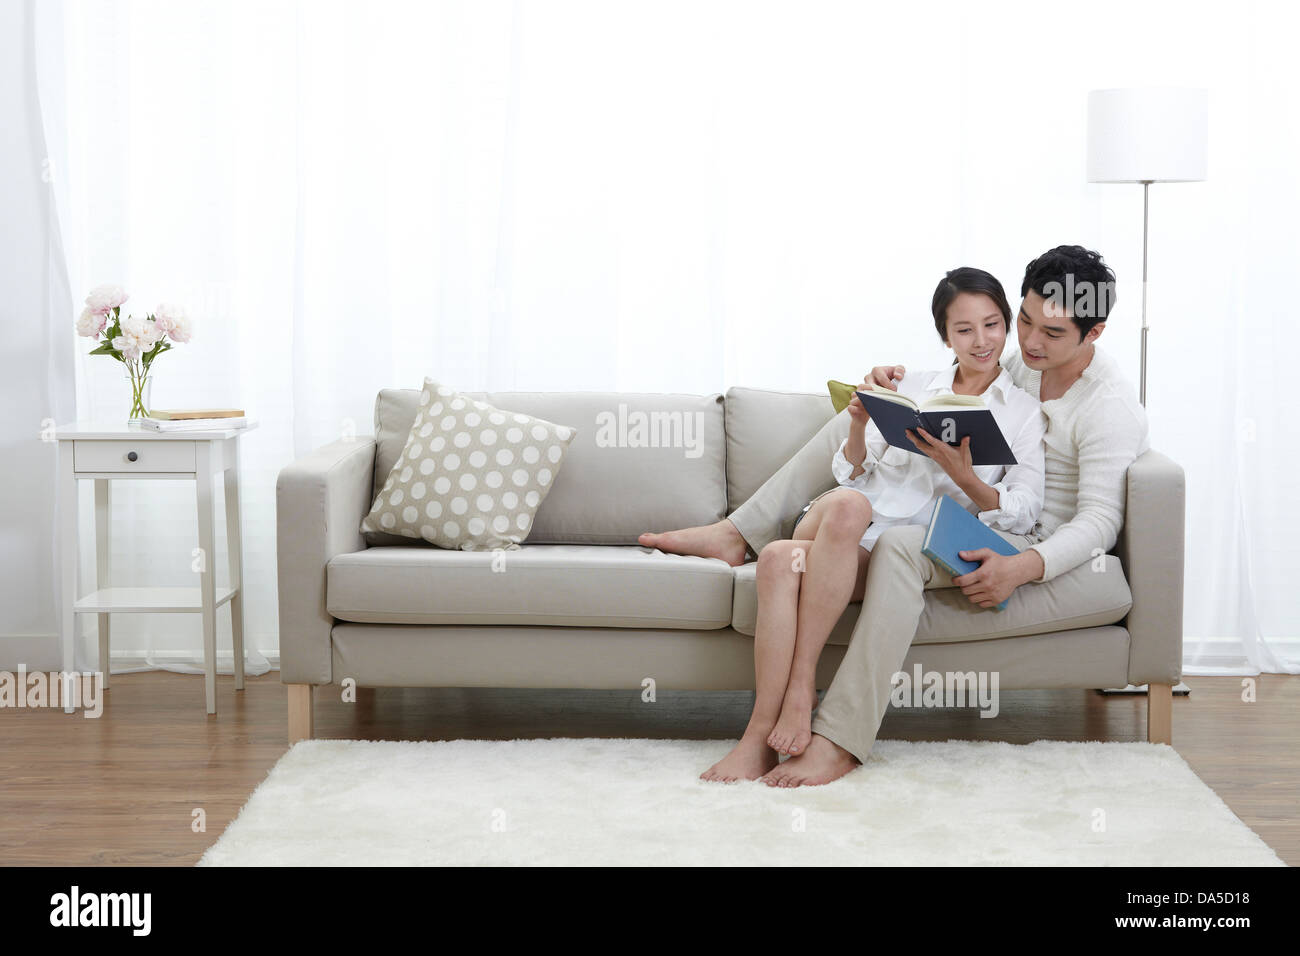 A young couple sitting on a couch. Stock Photo